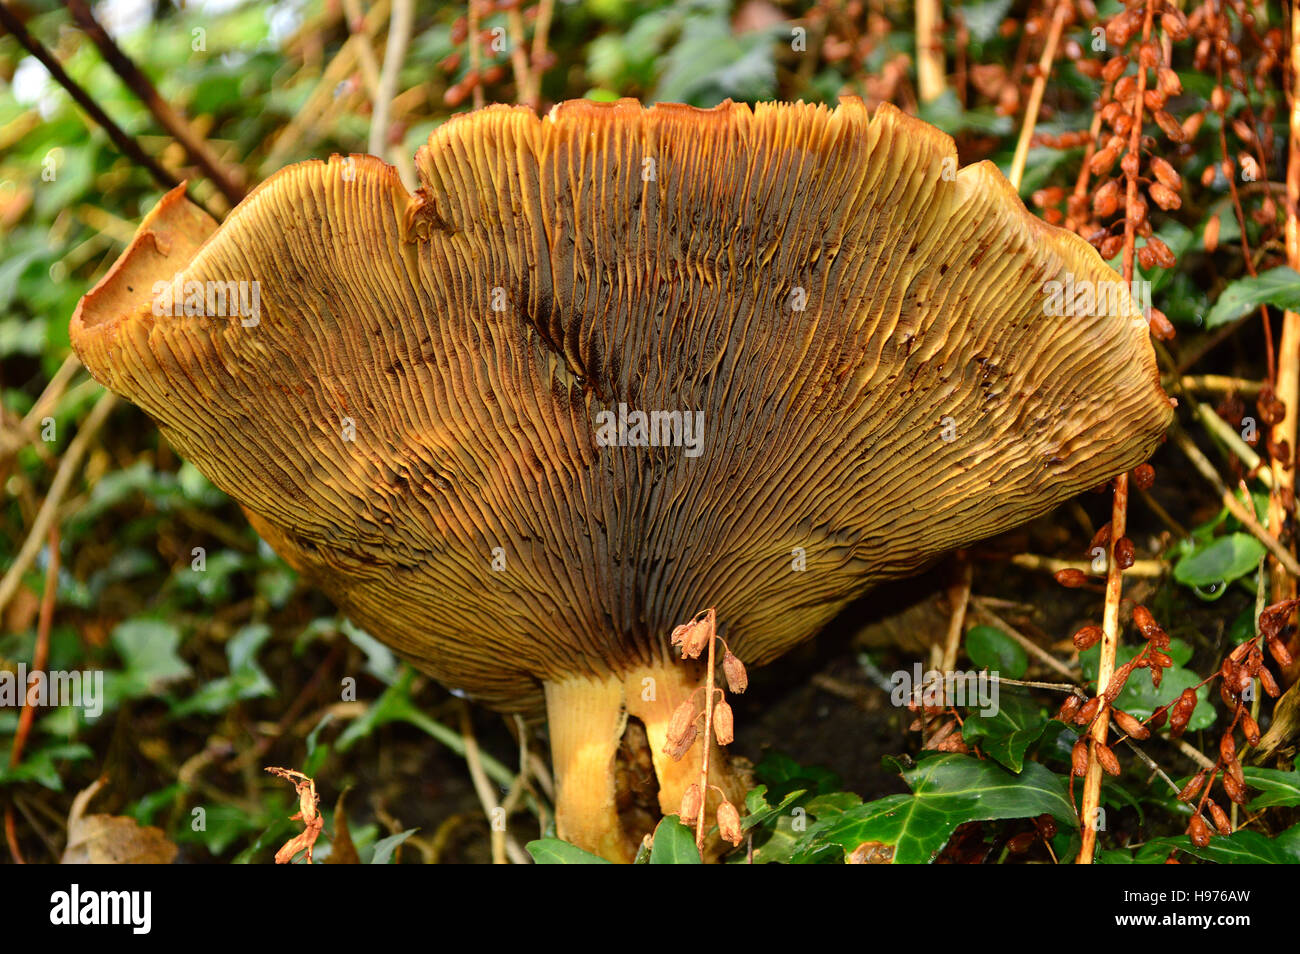 Underside of Toadstools, or Fungi, showing gills Stock Photo